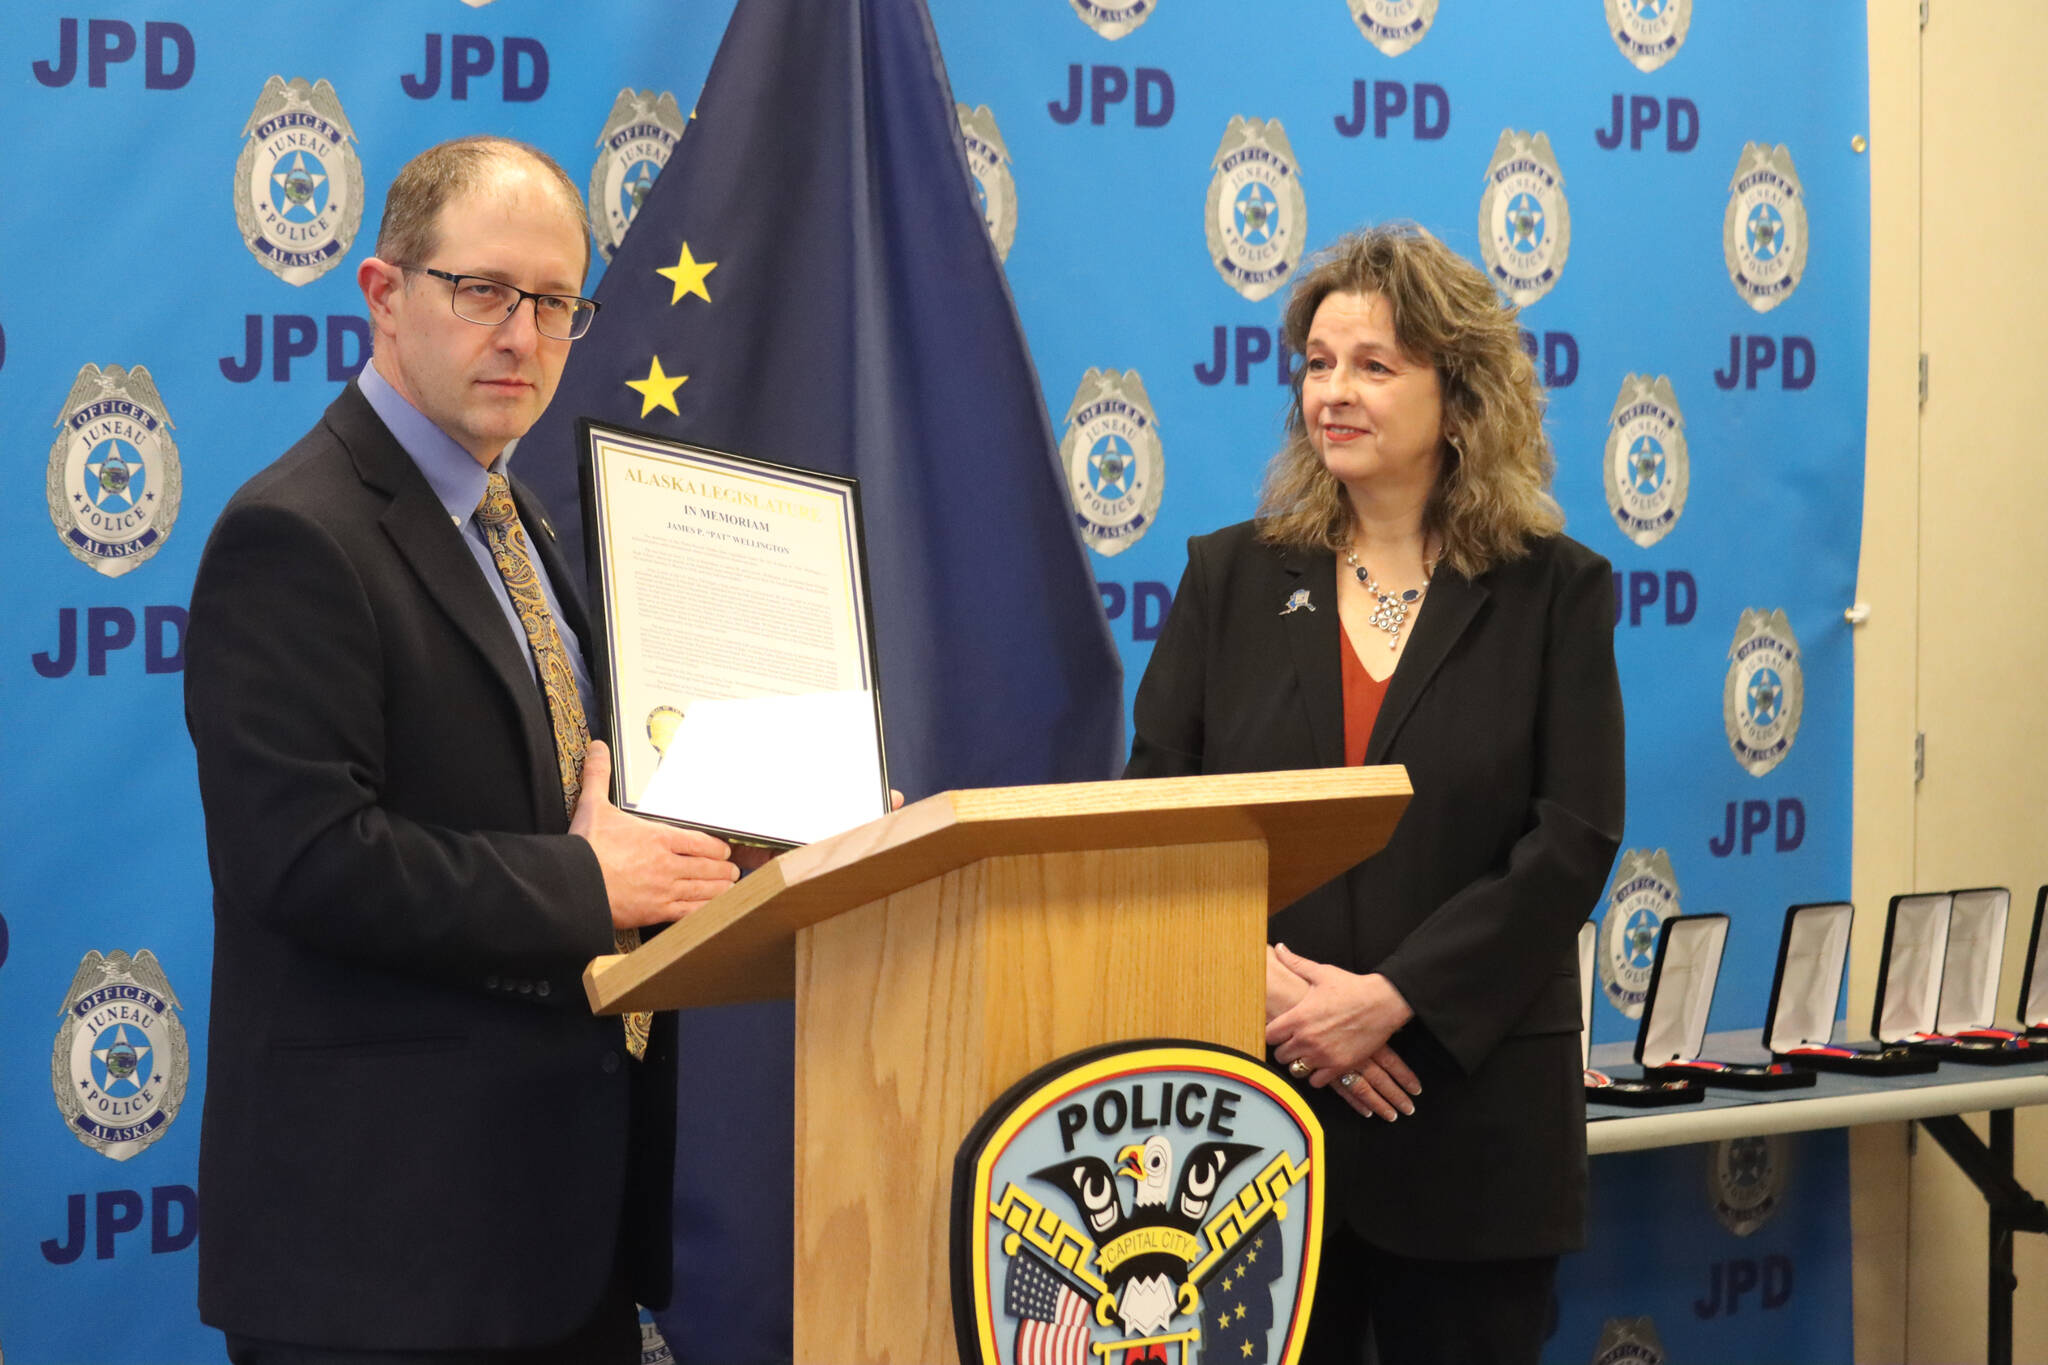 State Senator Jesse Kiehl presents legislative memoriam to Karen Bonnett Petersen who accepted the award during JPD’s award ceremony on Monday on behalf of her uncle, late JPD Chief Pat Wellington, who passed away in May 2021. (Jonson Kuhn /Juneau Empire)